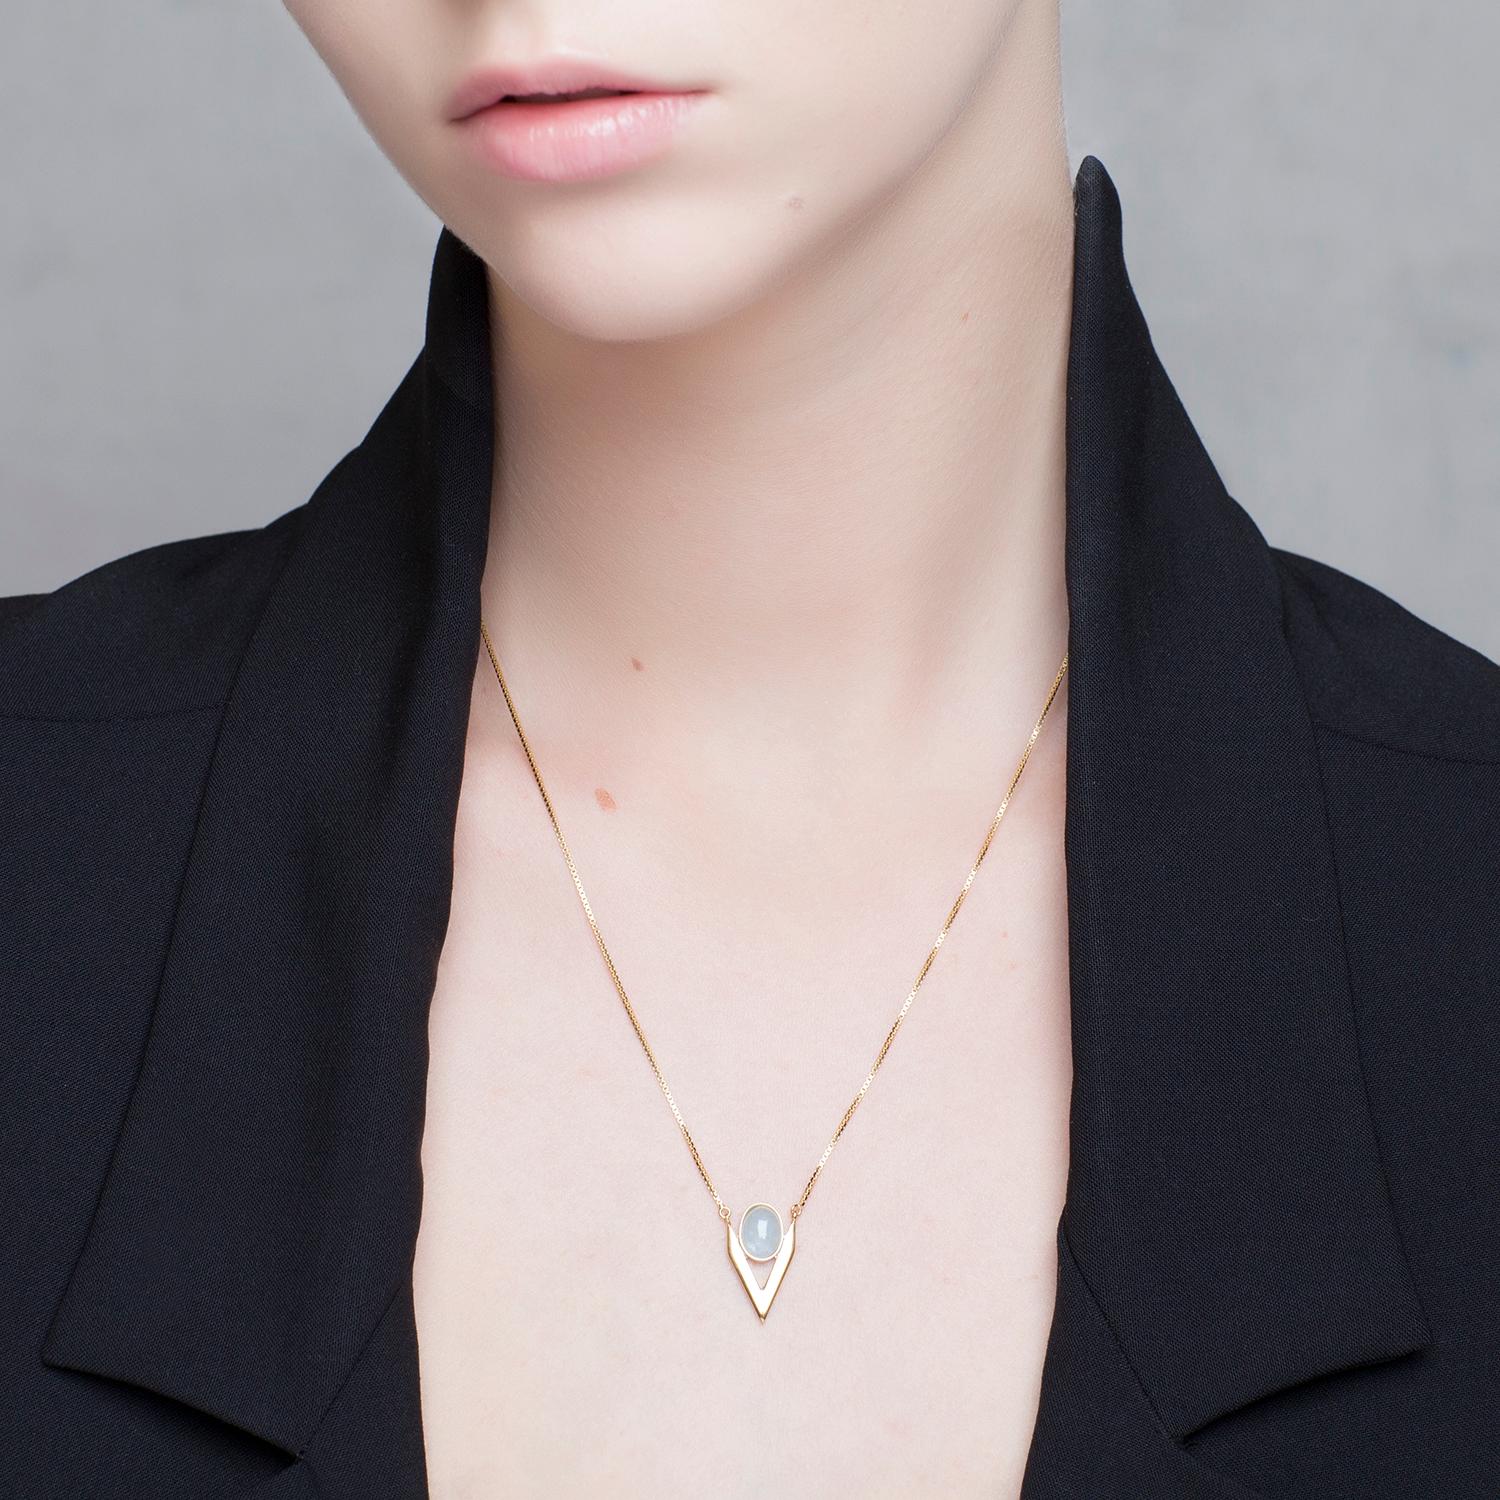 Crafted in Italy, Iosselliani jewellery pieces are intended to be the new classic with an edgy style. Designed with a 9 Karat yellow gold chain, the necklace features an aquamarine cabochon framed into a V shape. Bringing geometry to your look this